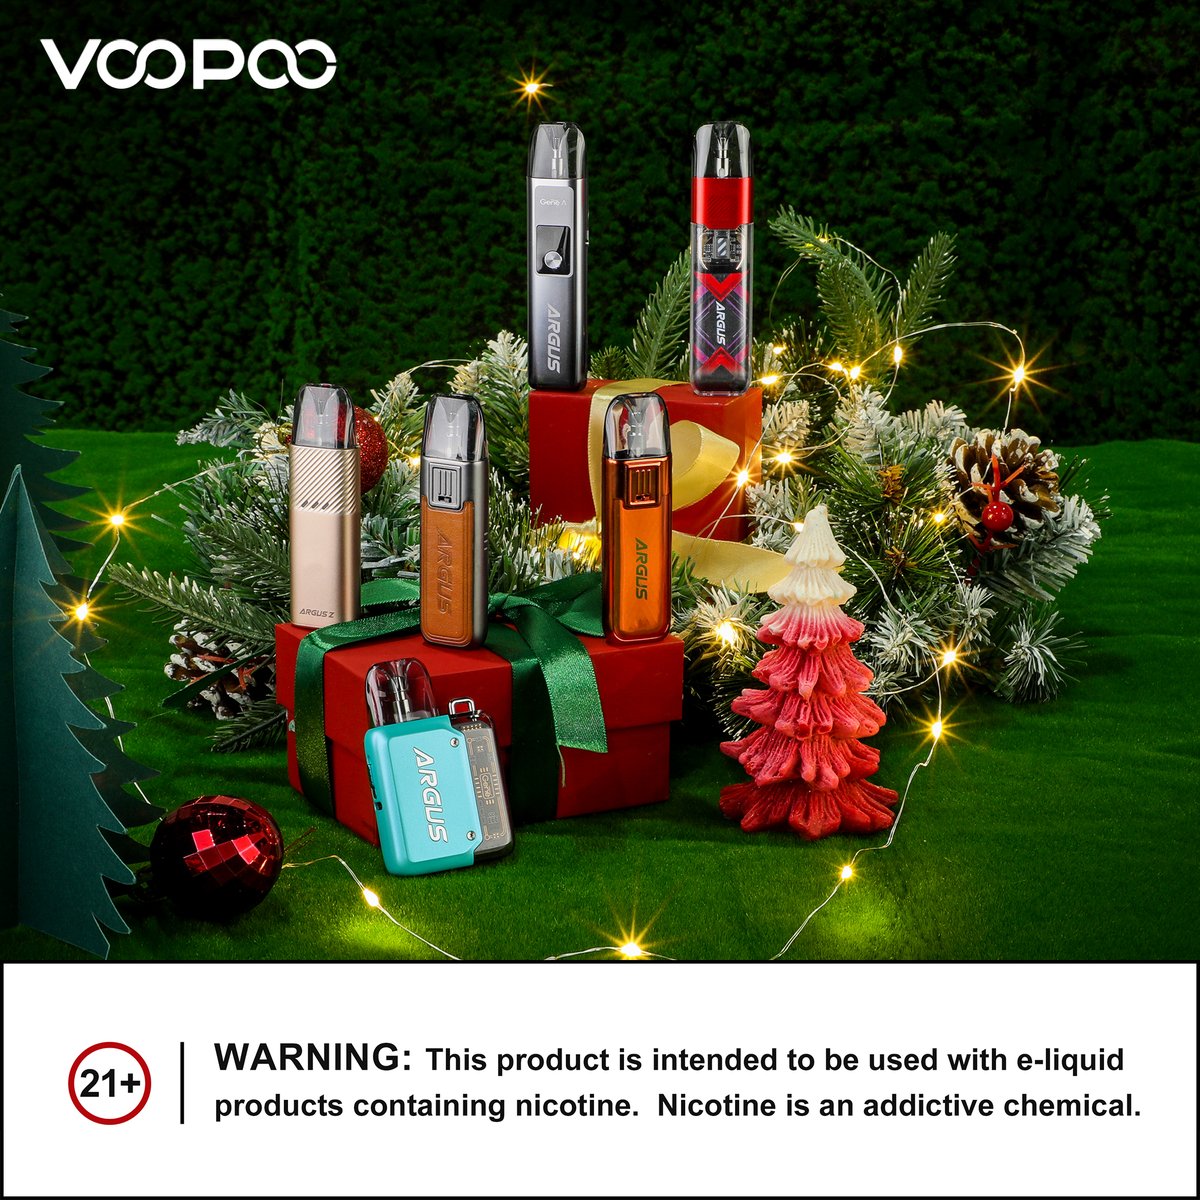 Christmas is coming, let the ARGUS Pod Family spend the warm winter with you!🥂🎄

#voopoo #voopooargus #argusp1s #arguspod #argusp1 #argusz #argusg #arguspodse #arguspodsfamily #icosmcode